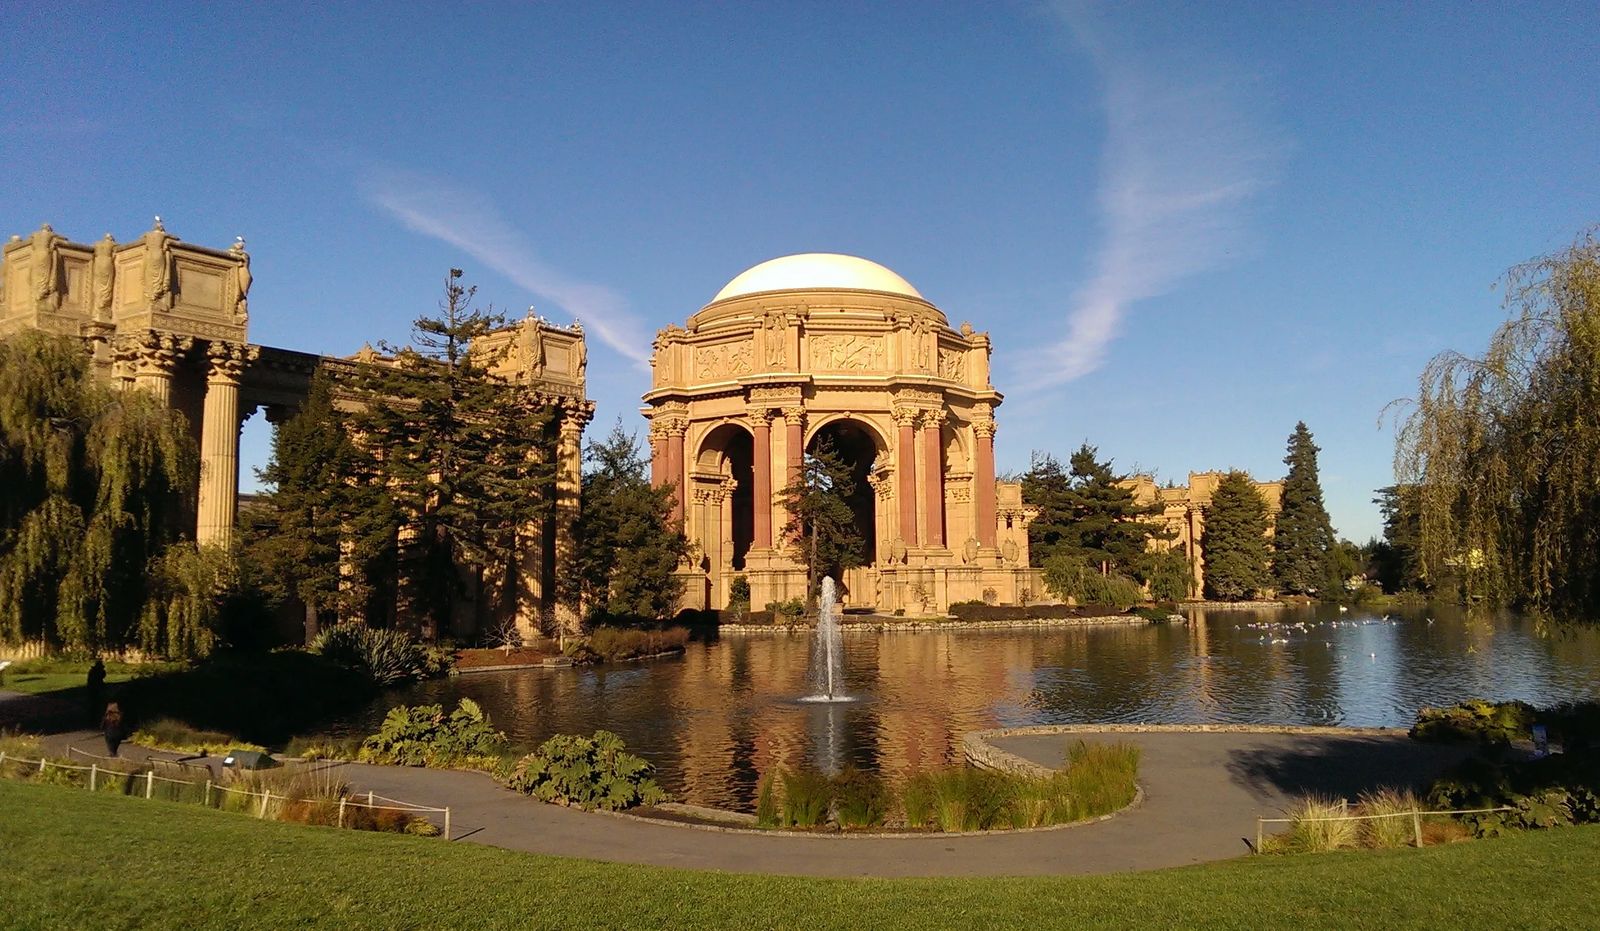 Photo of the Palace of Fine Arts in San Francisco, California